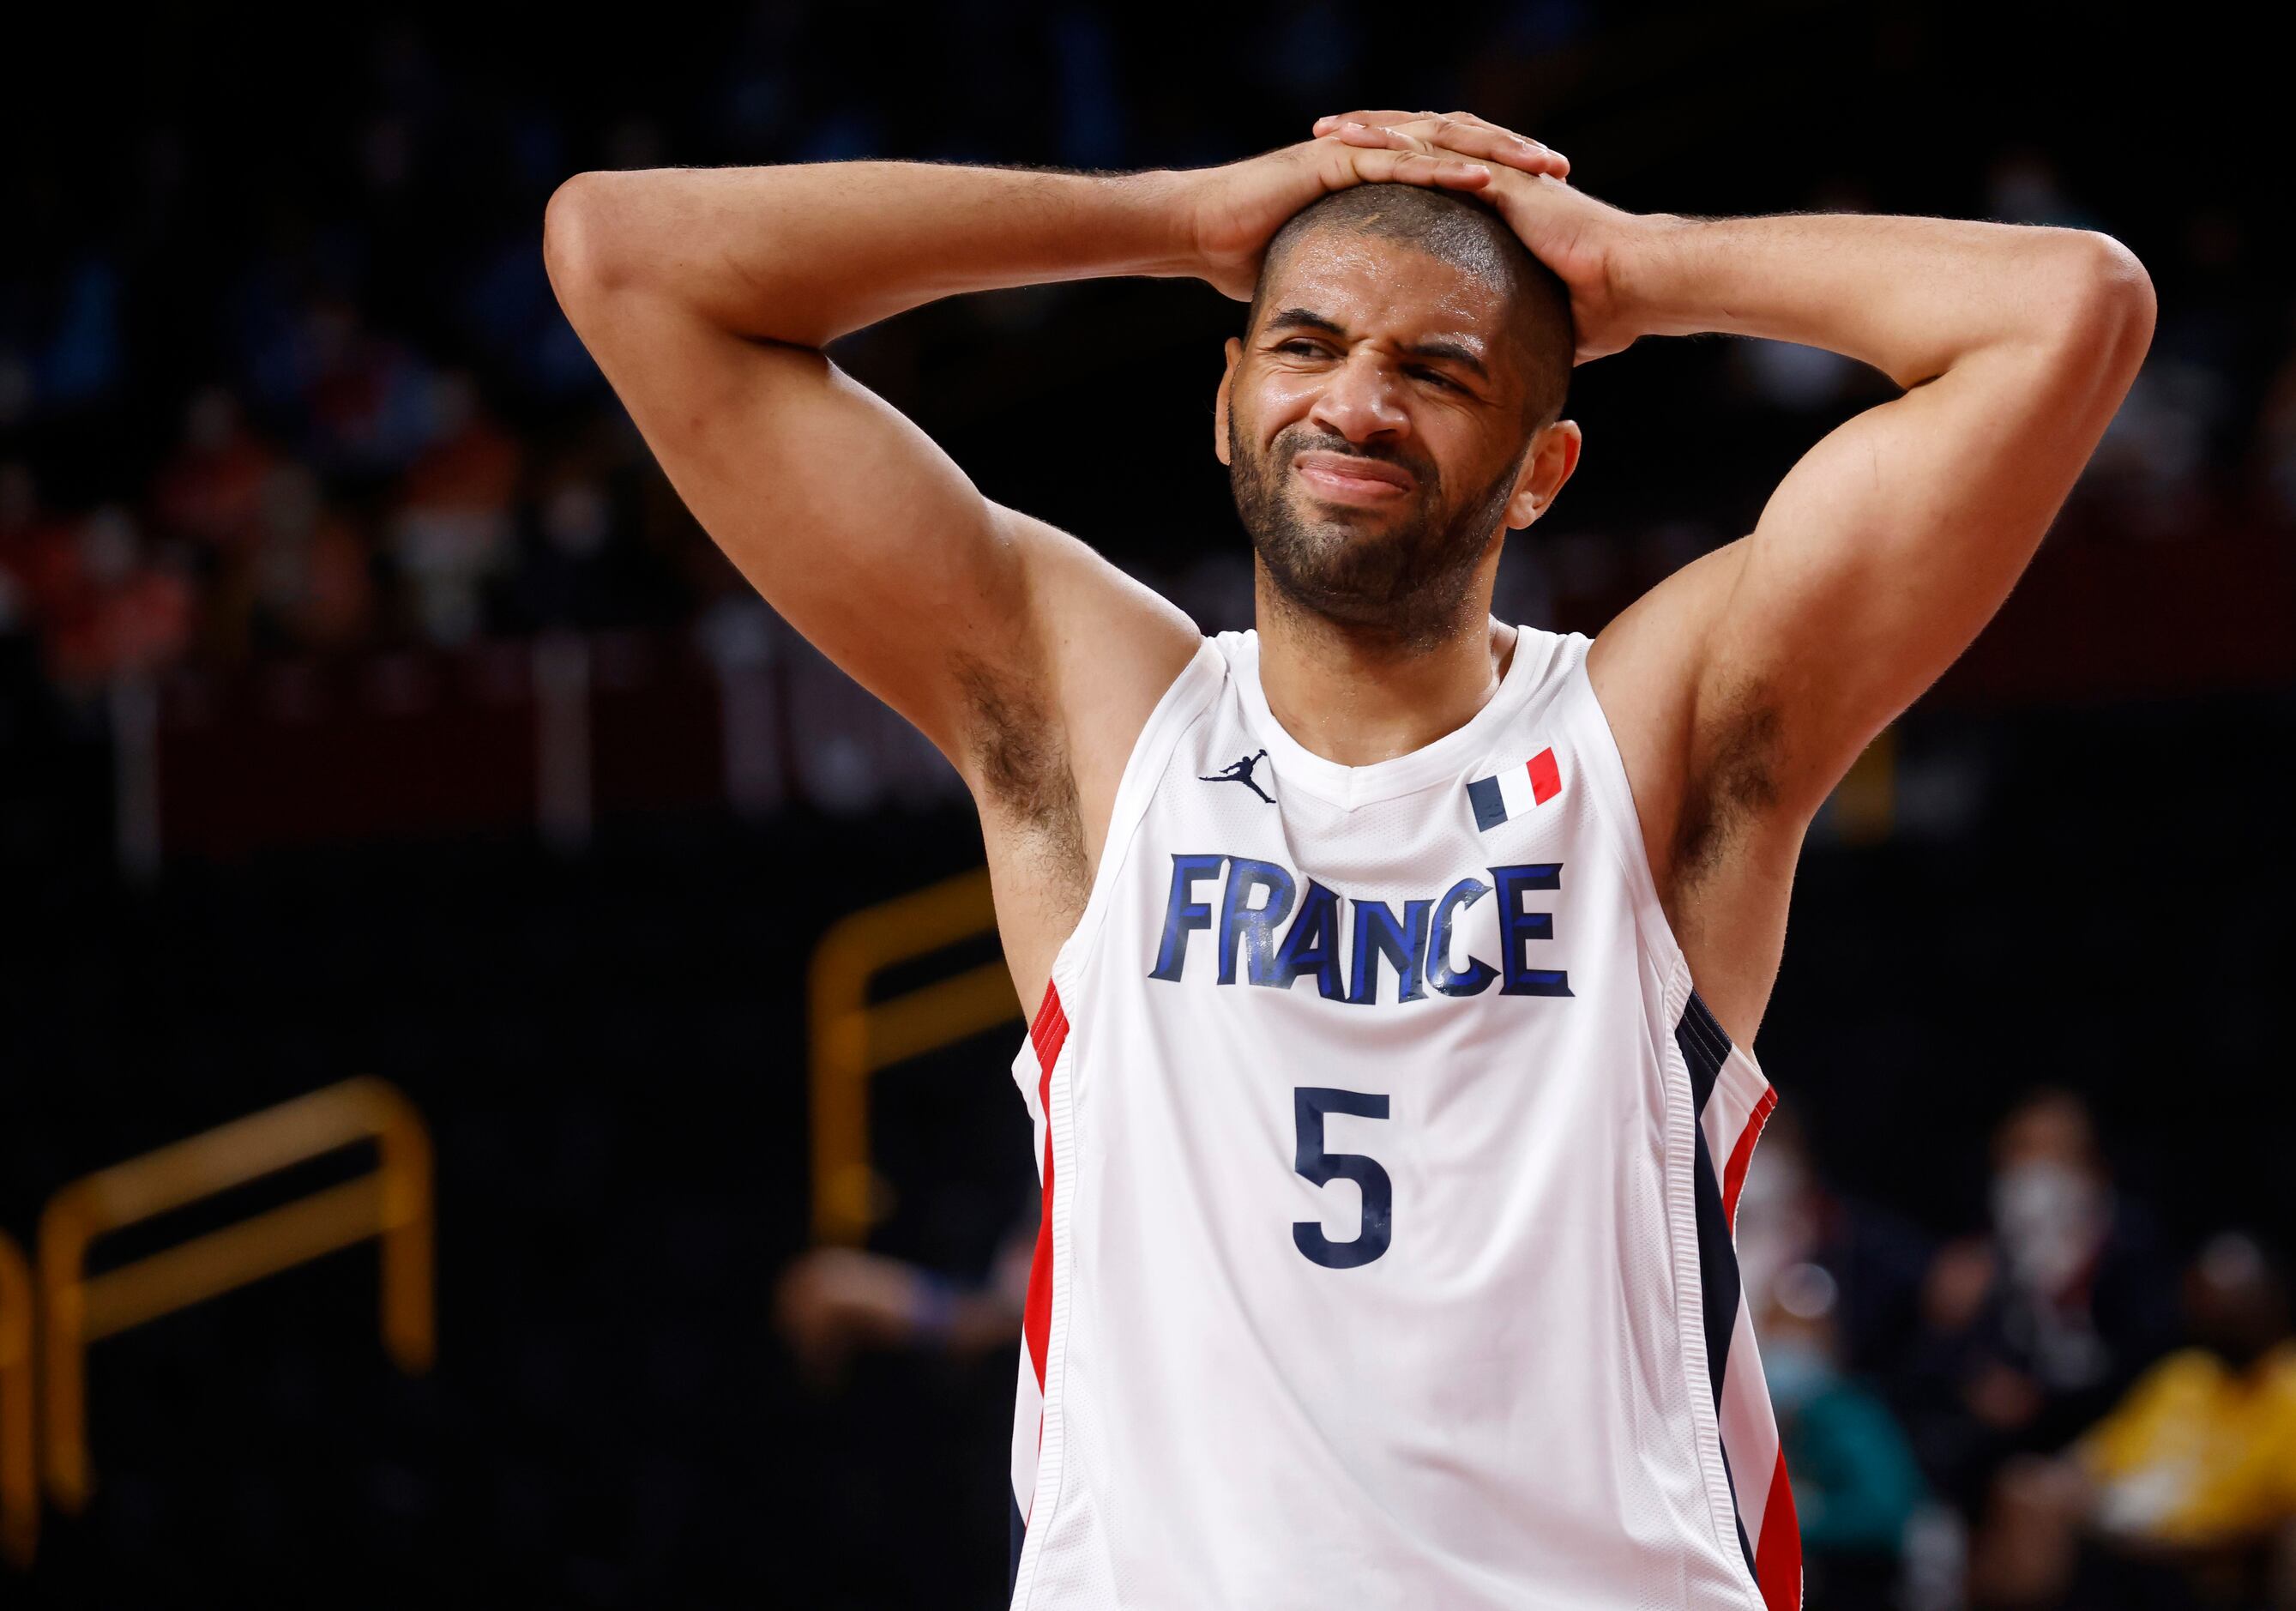 France’s Nicols Batum (5) reacts to a teammate getting called for a foul in a game against...